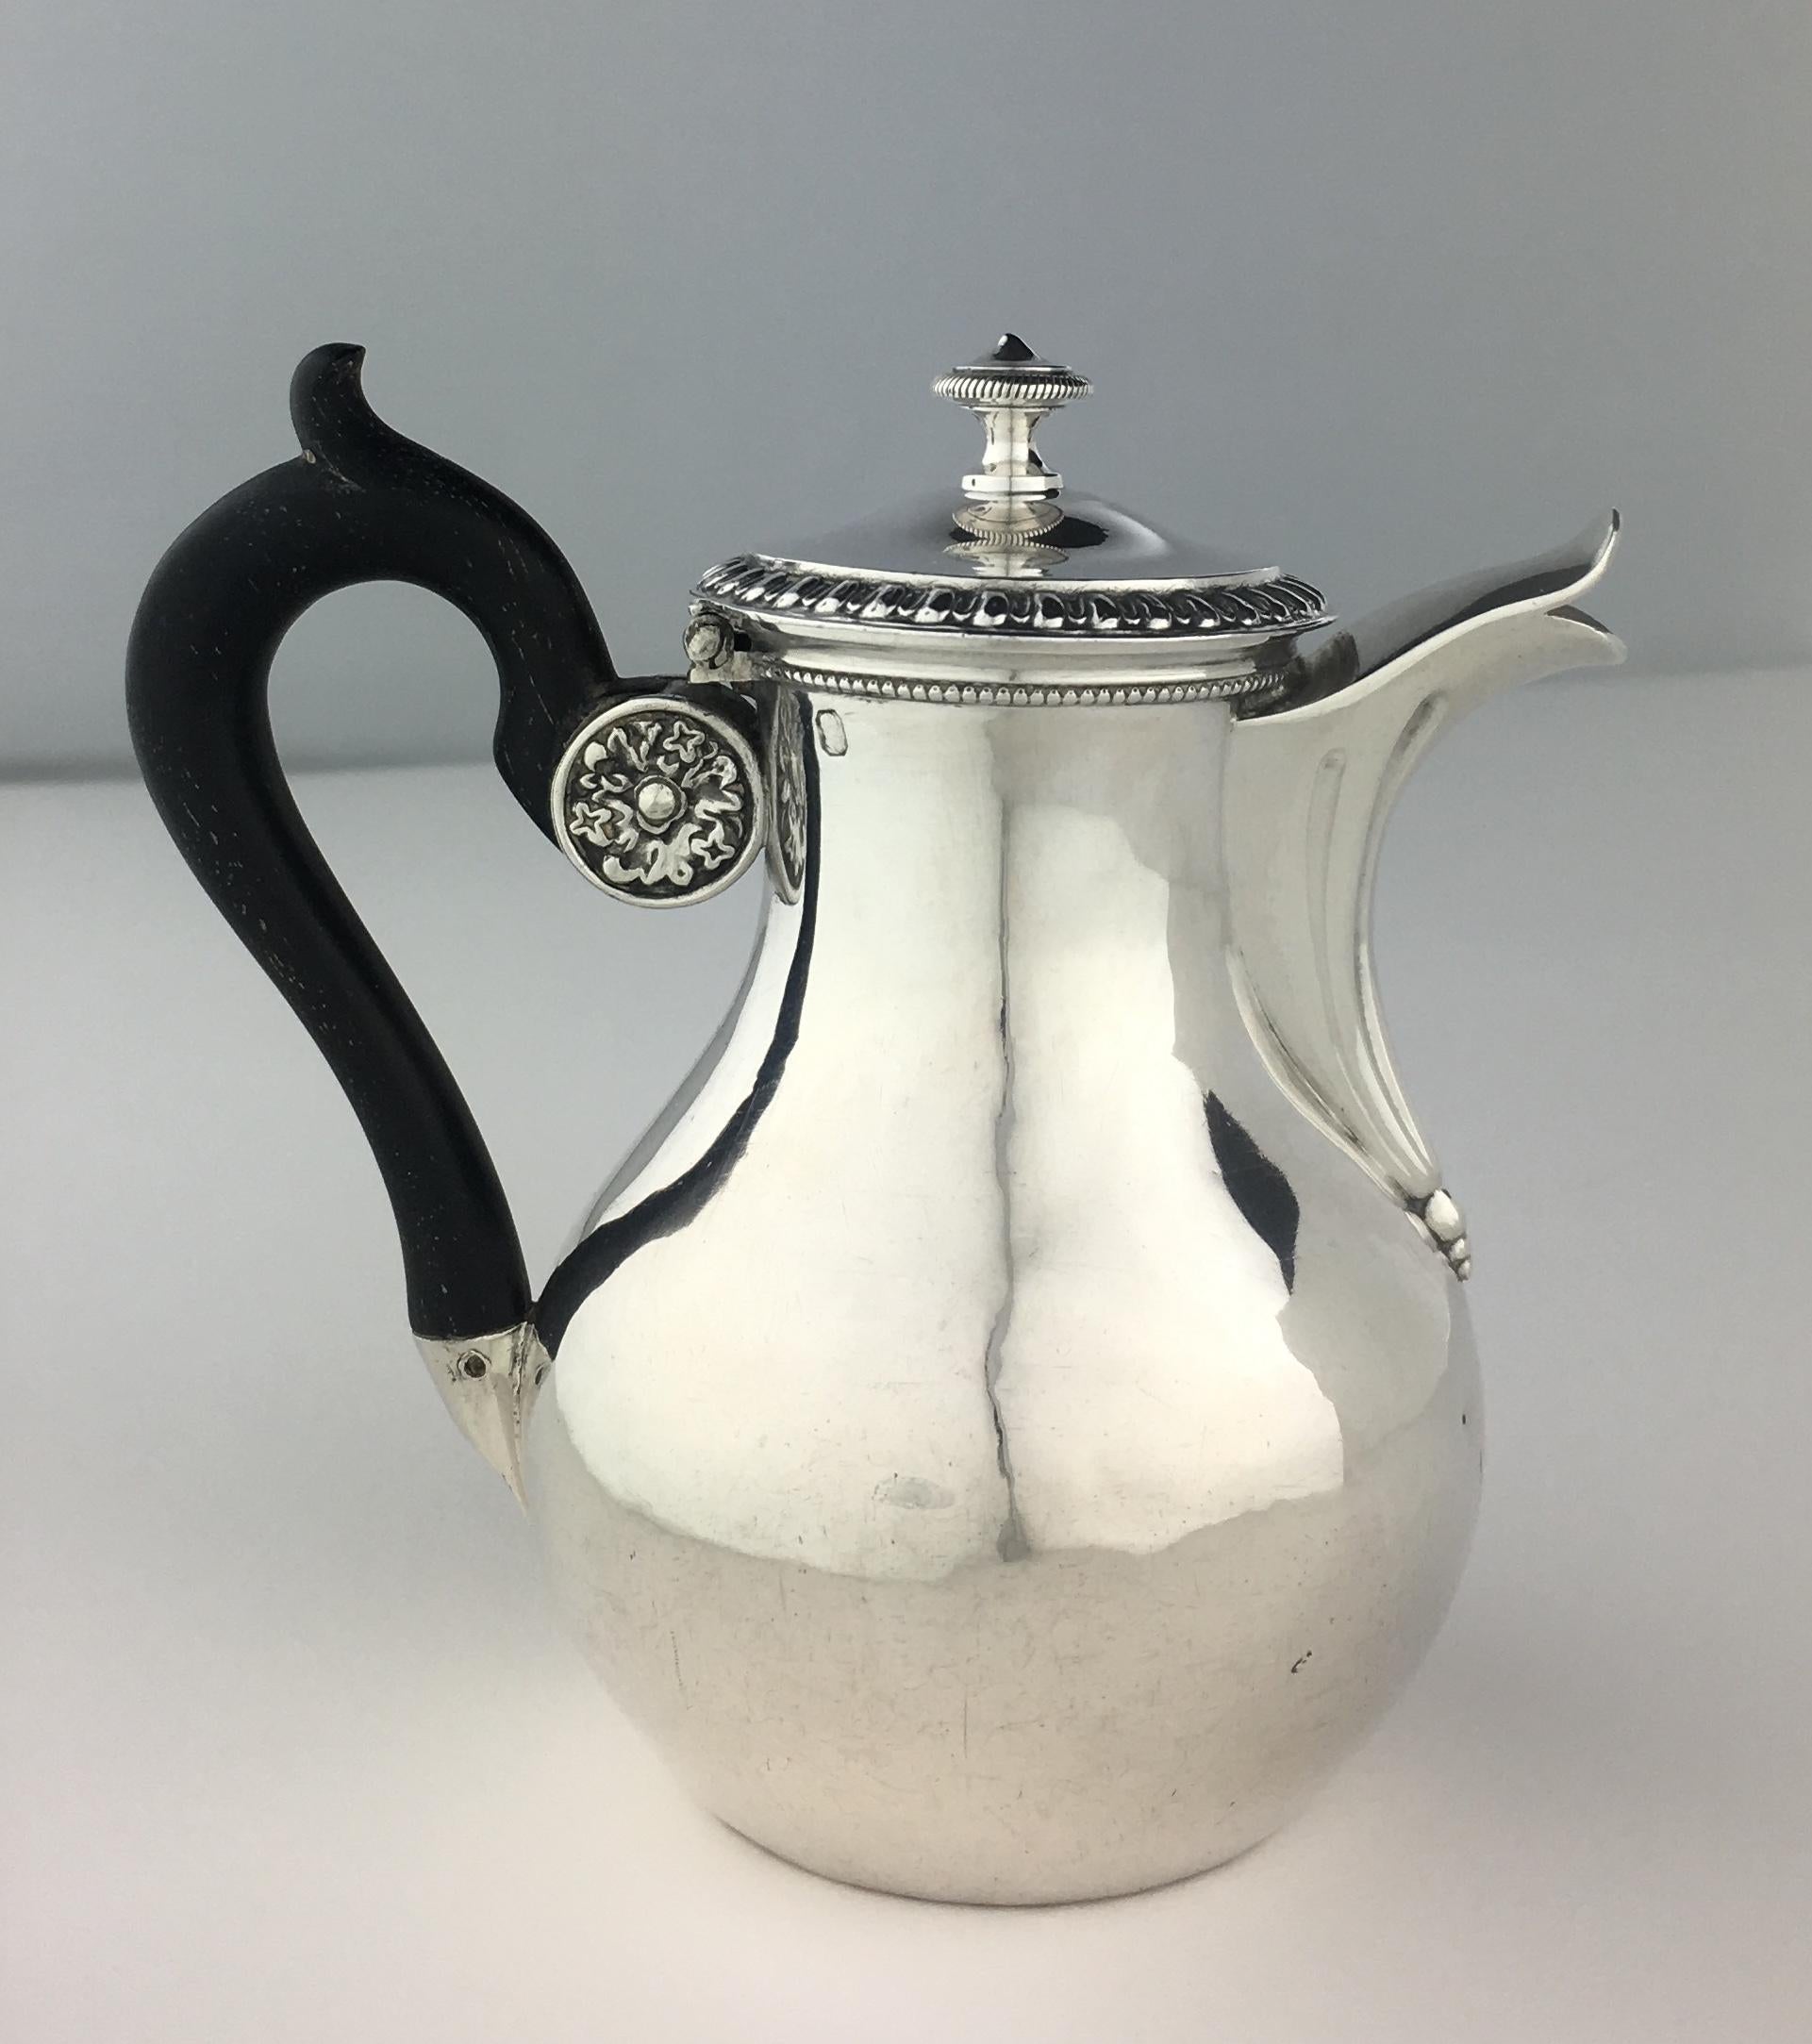 Maitre Fauvre 19th Century French Sterling Silver Chocolate, Tea or Coffee Pot 1